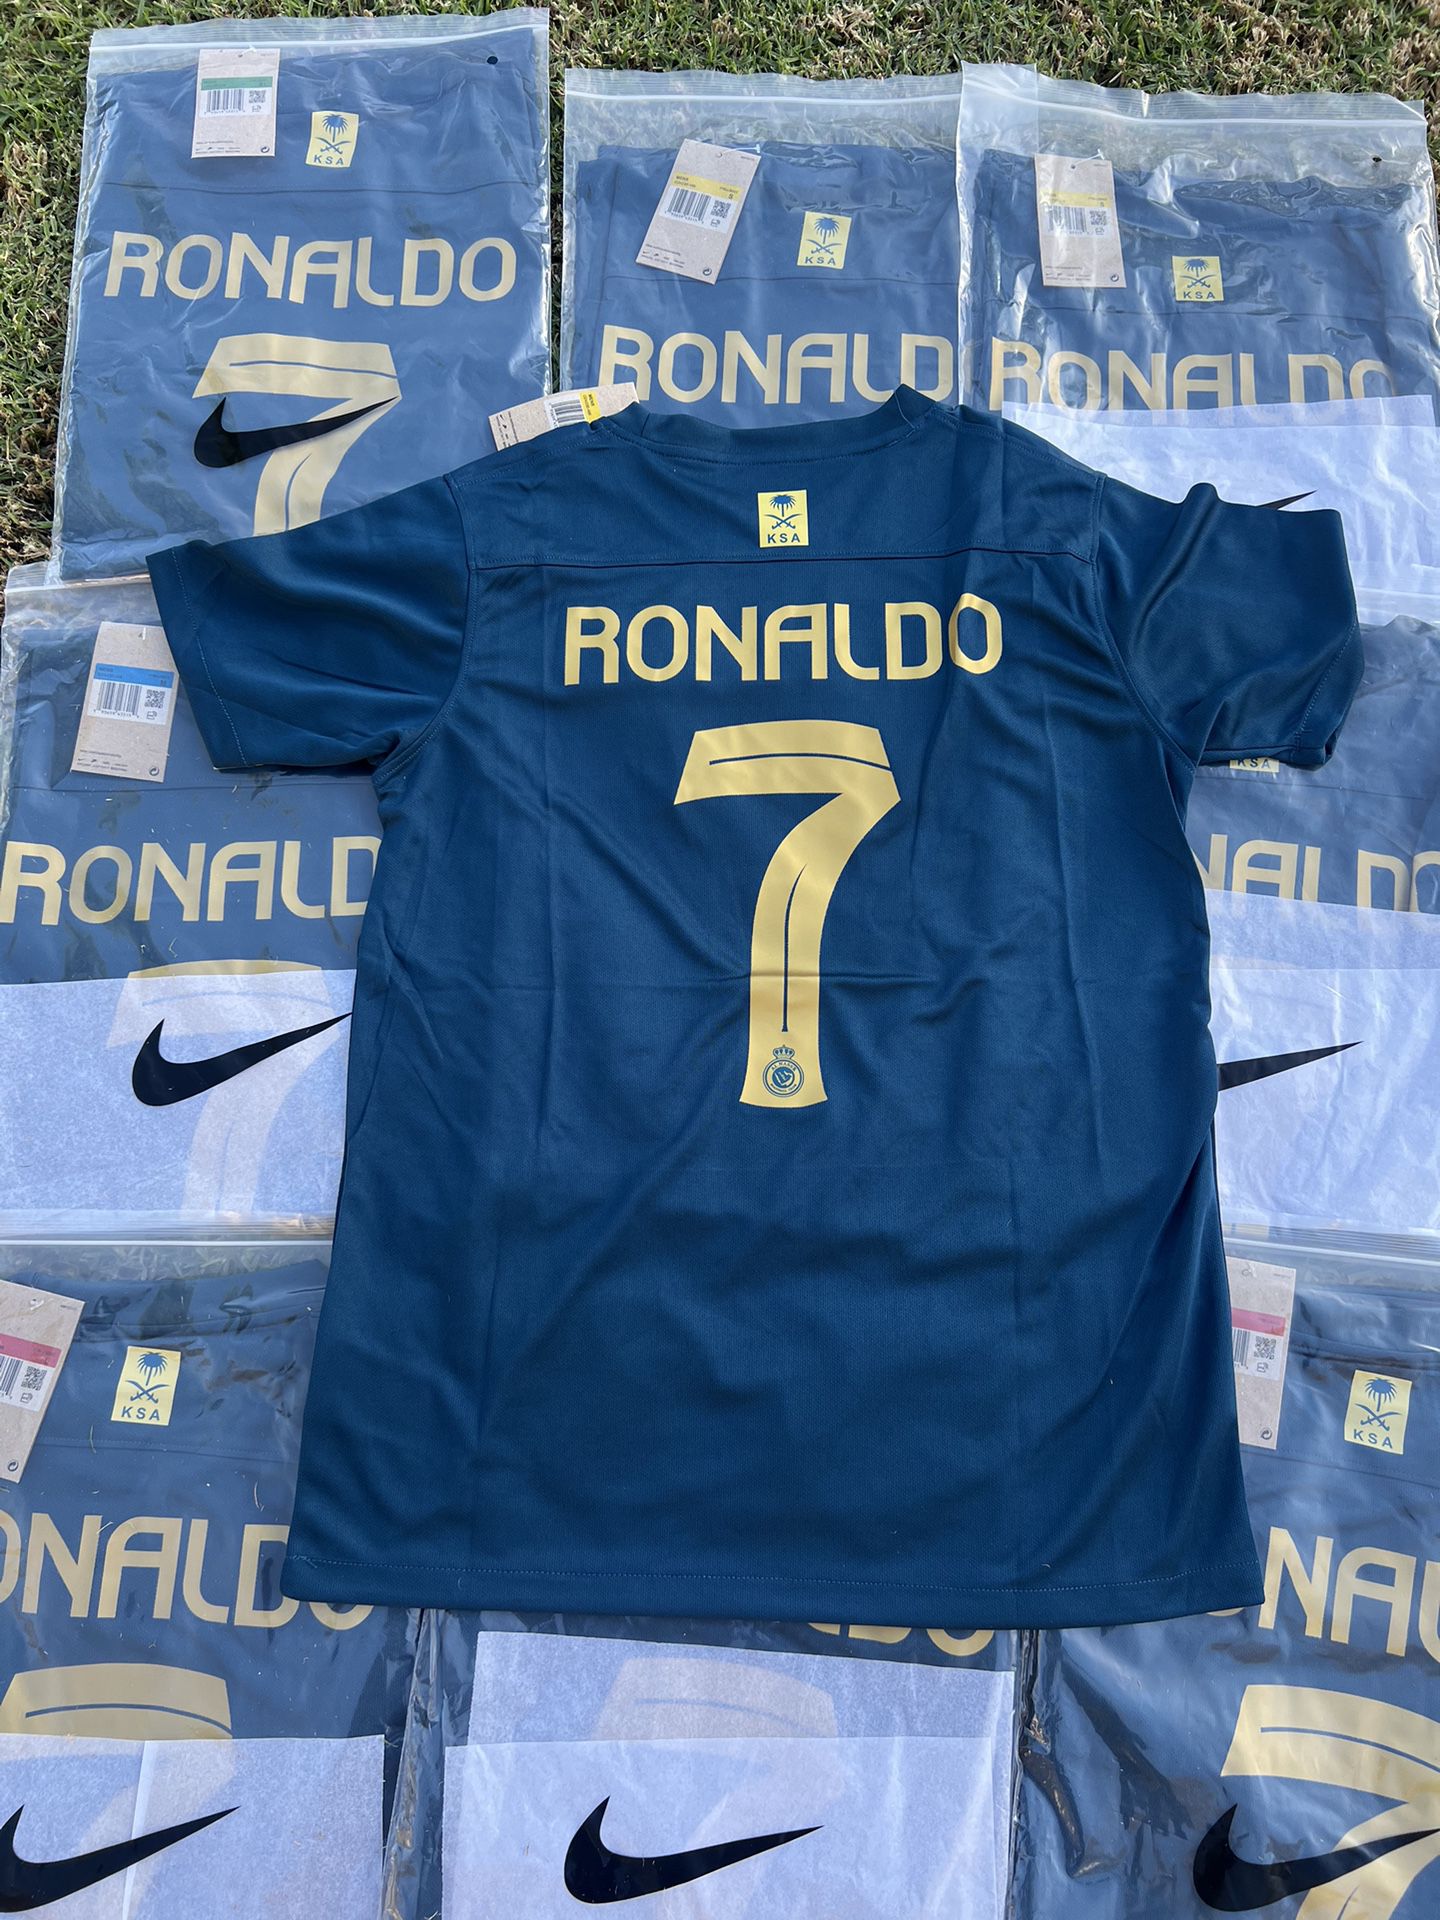 Cristiano Ronaldo CR7 Al-Nassr 23/24 Third Kit playera more jerseys available check my profile for prices and sizes  Portugal Jersey Ronaldo player ve